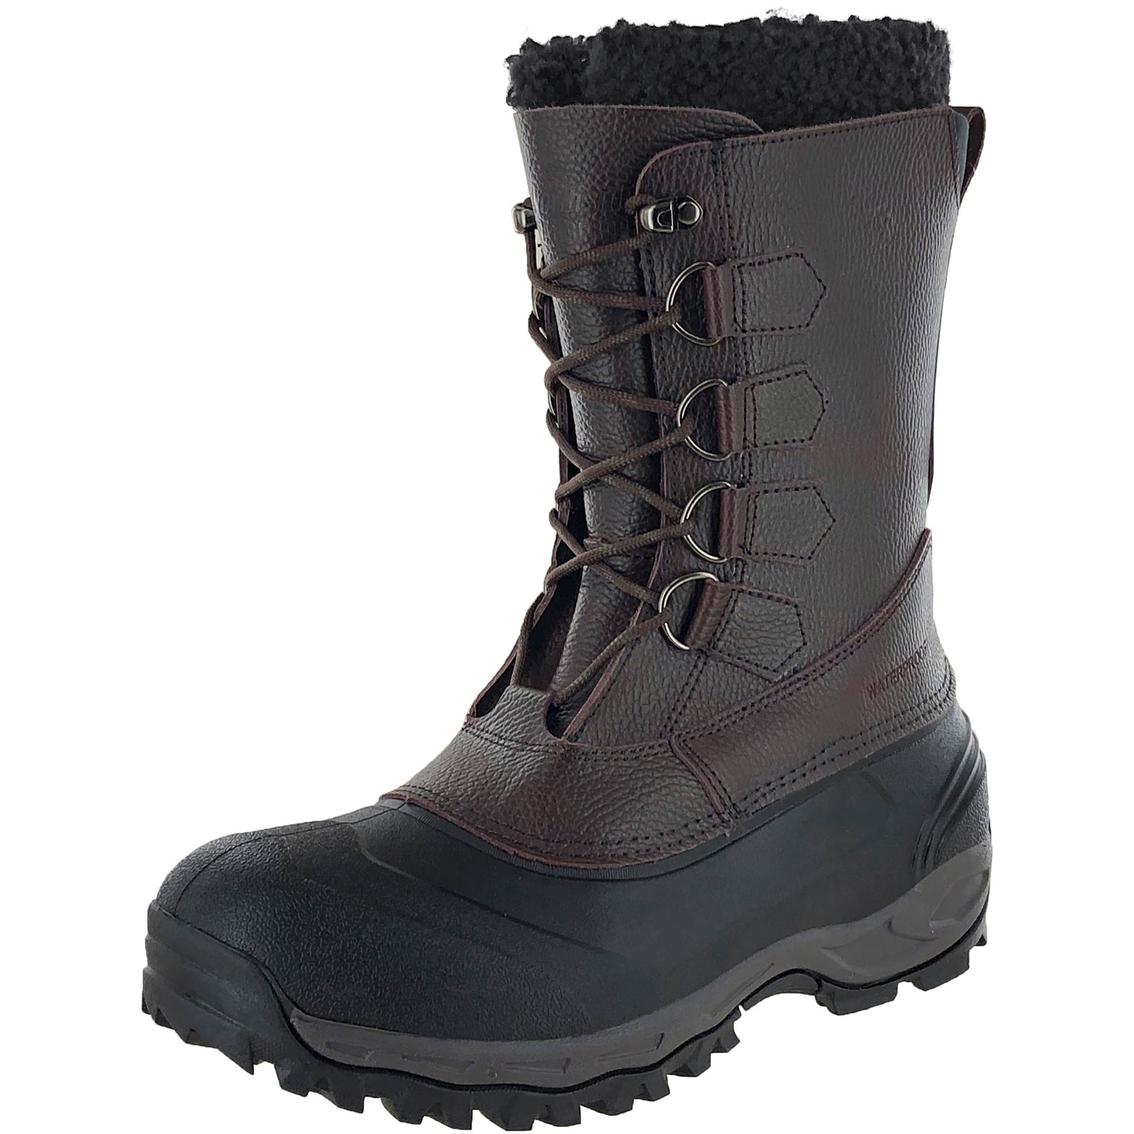 Northside Men's Smokey Point Winter Snow Boots | Boots | Shoes | Shop ...